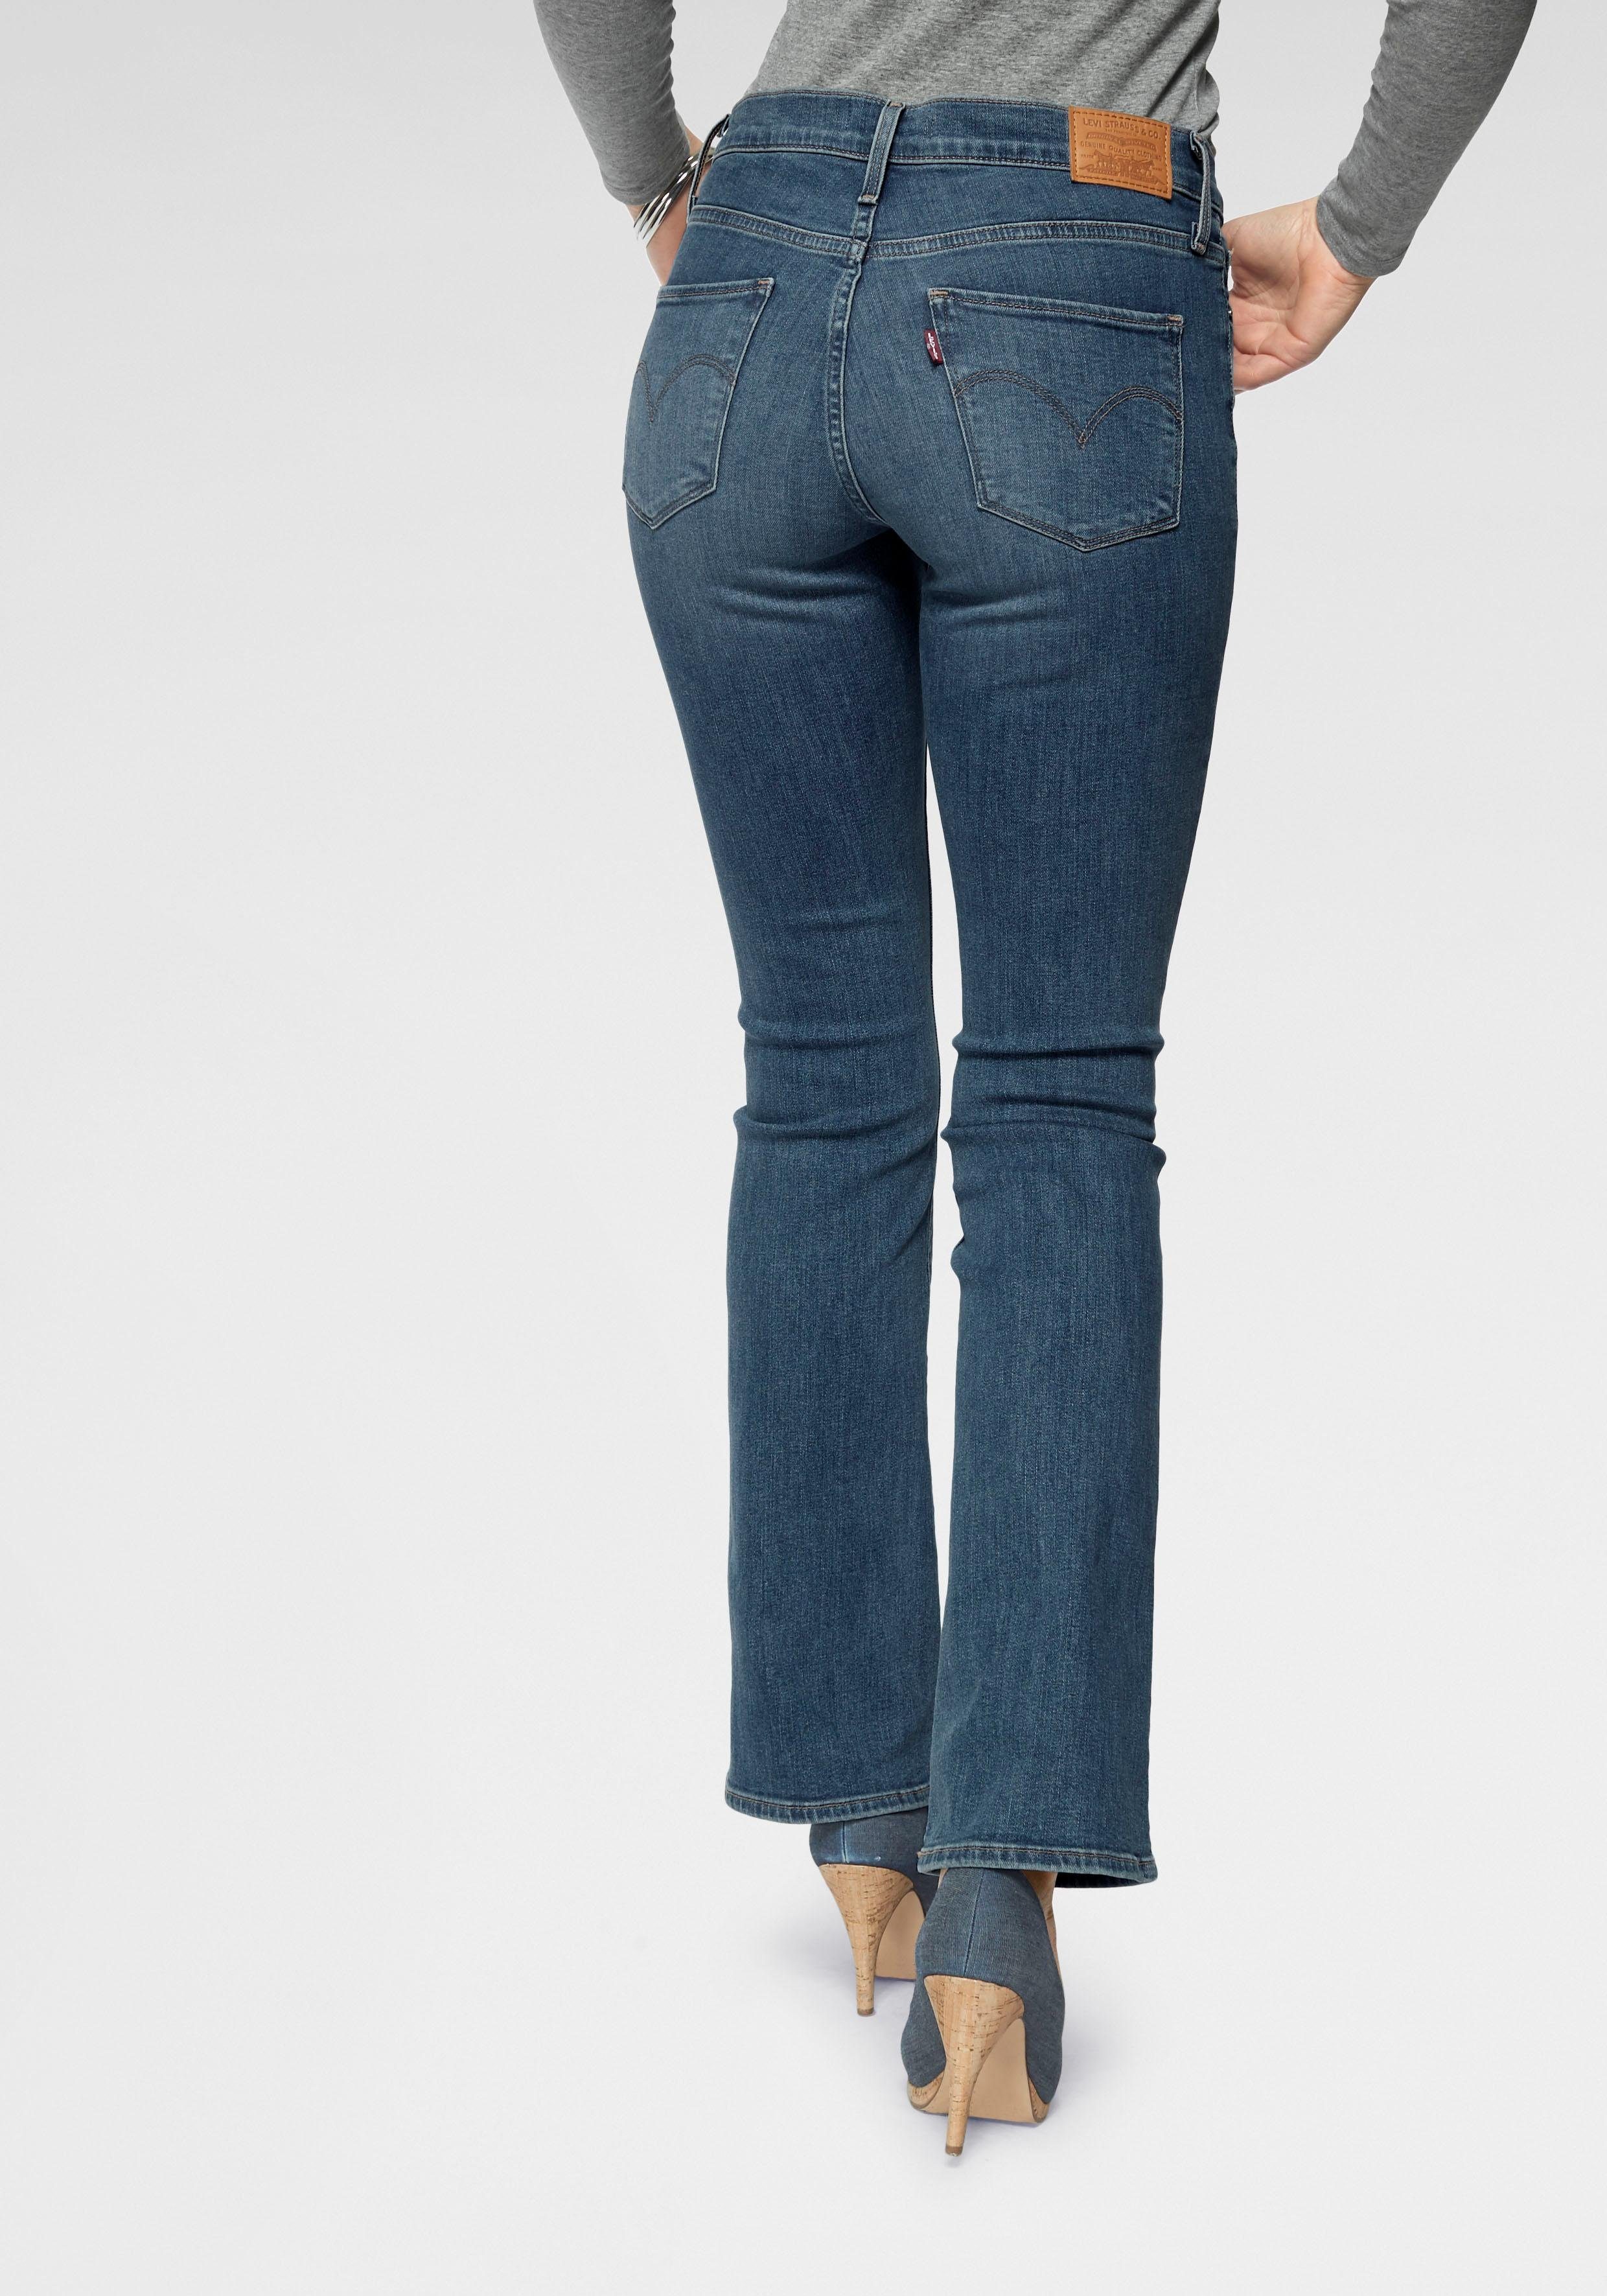 levi's 315 shaping jeans